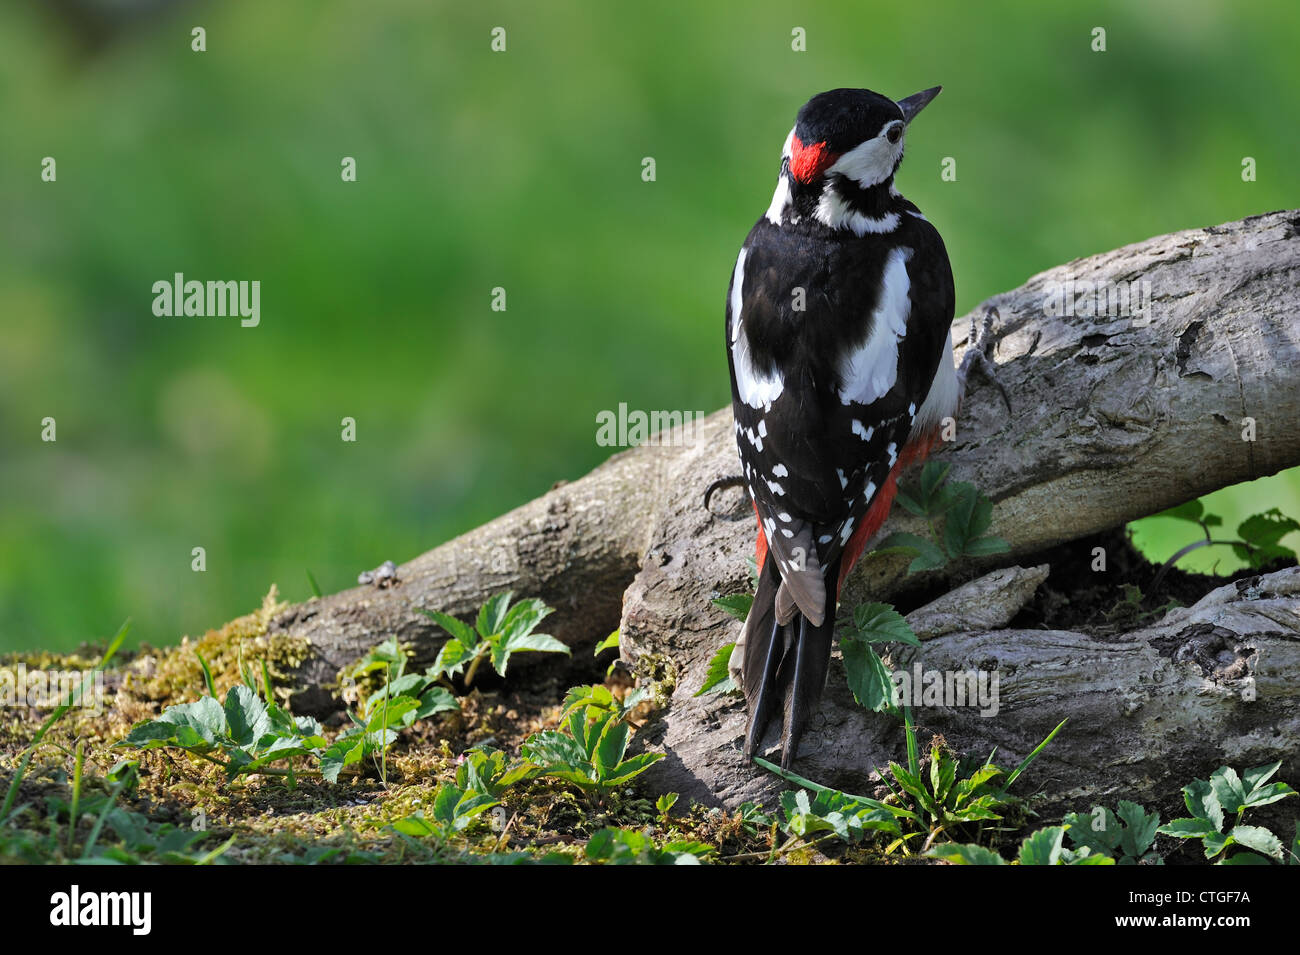 Great spotted woodpecker (Dendrocopos major) male perched on tree stump in forest, Belgium Stock Photo